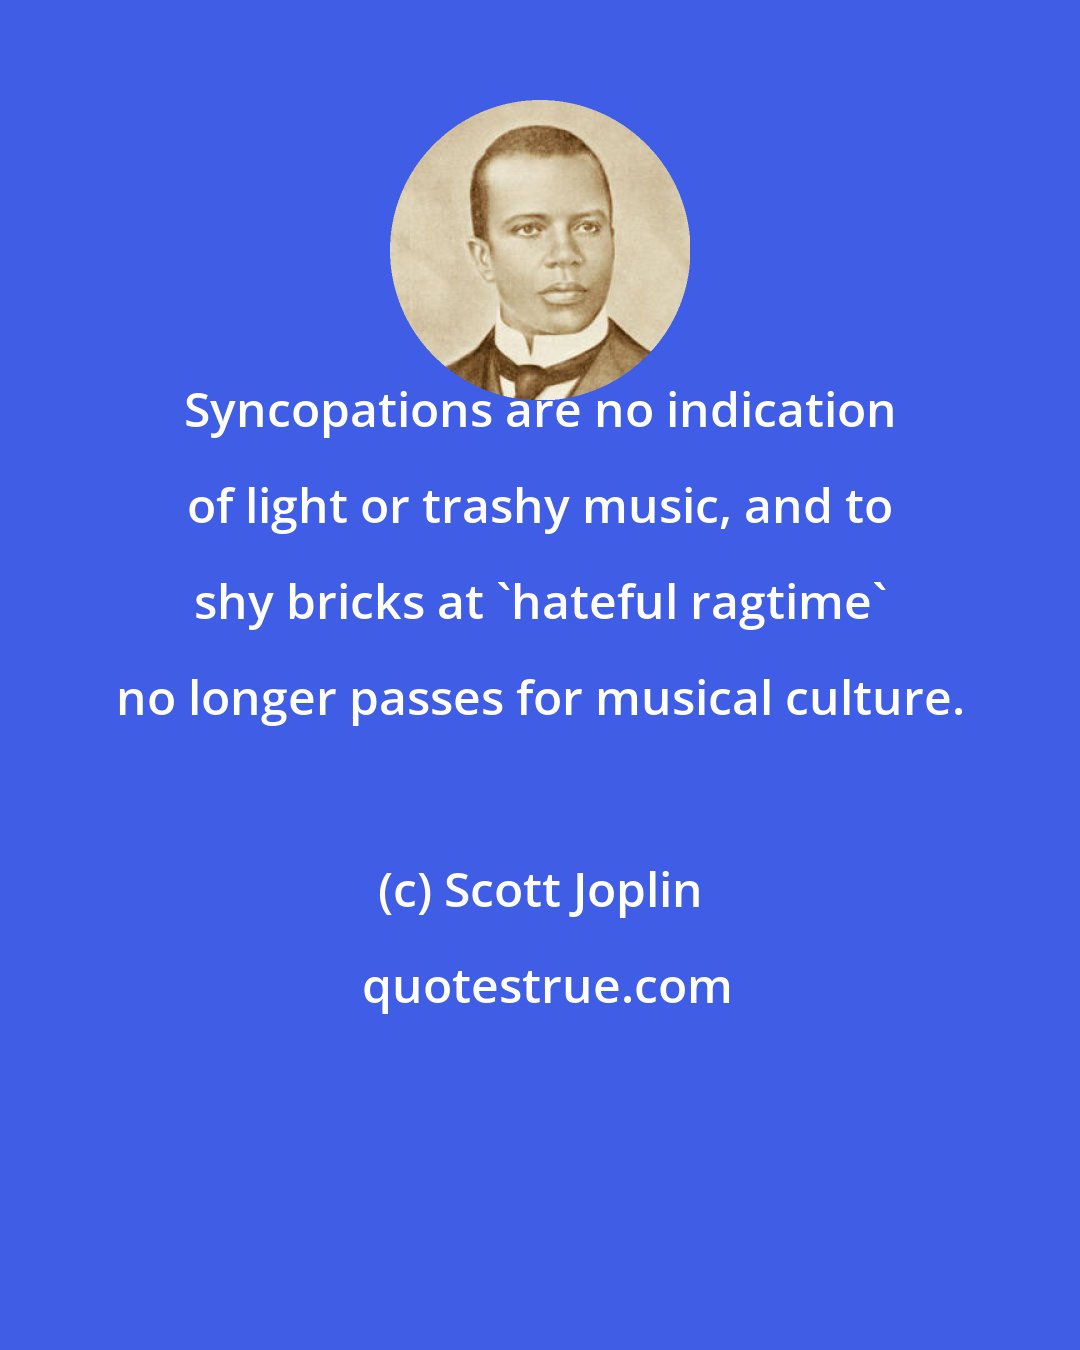 Scott Joplin: Syncopations are no indication of light or trashy music, and to shy bricks at 'hateful ragtime' no longer passes for musical culture.